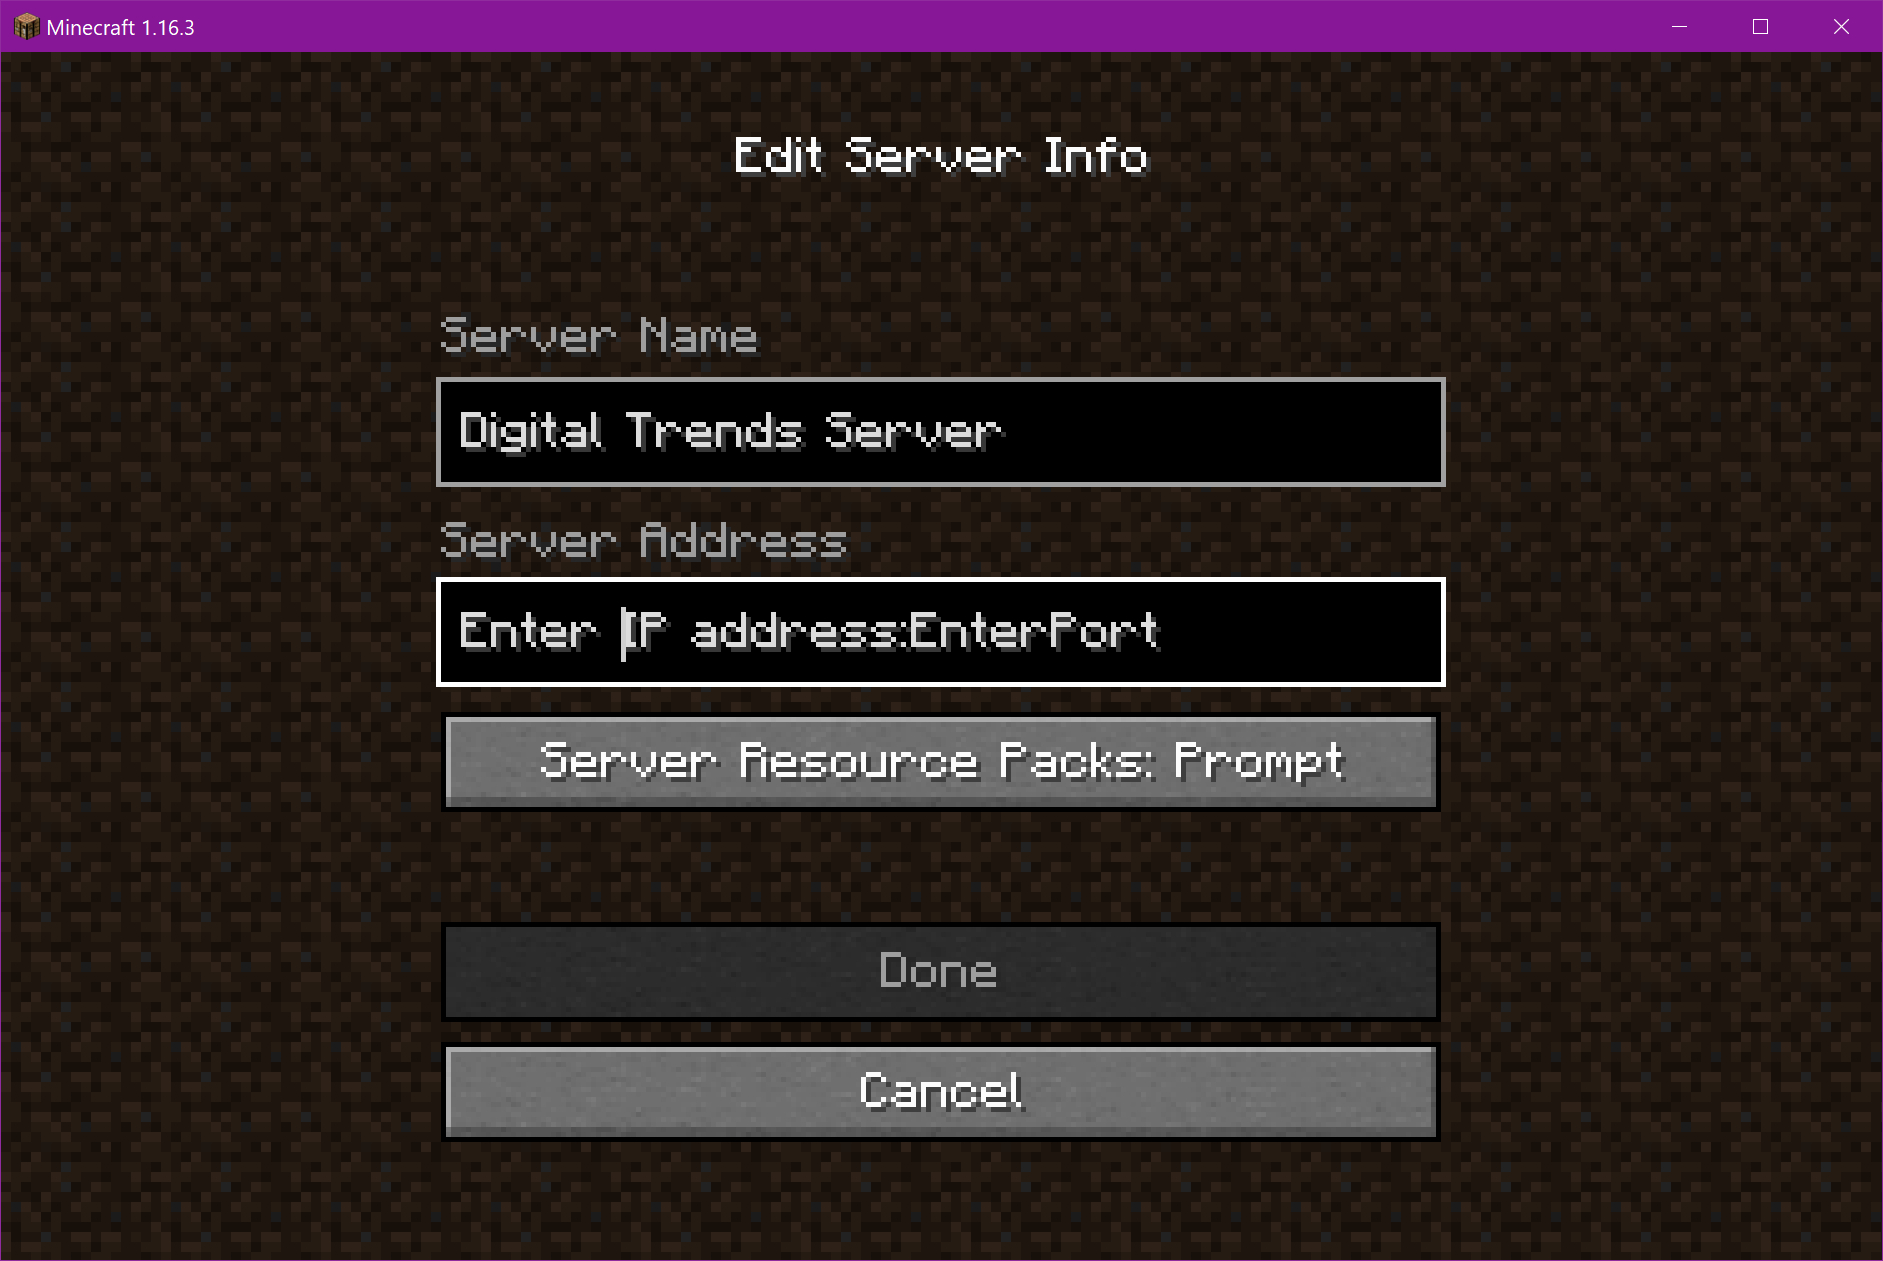 FREE Private Servers And How To Server Hop FOR FREE